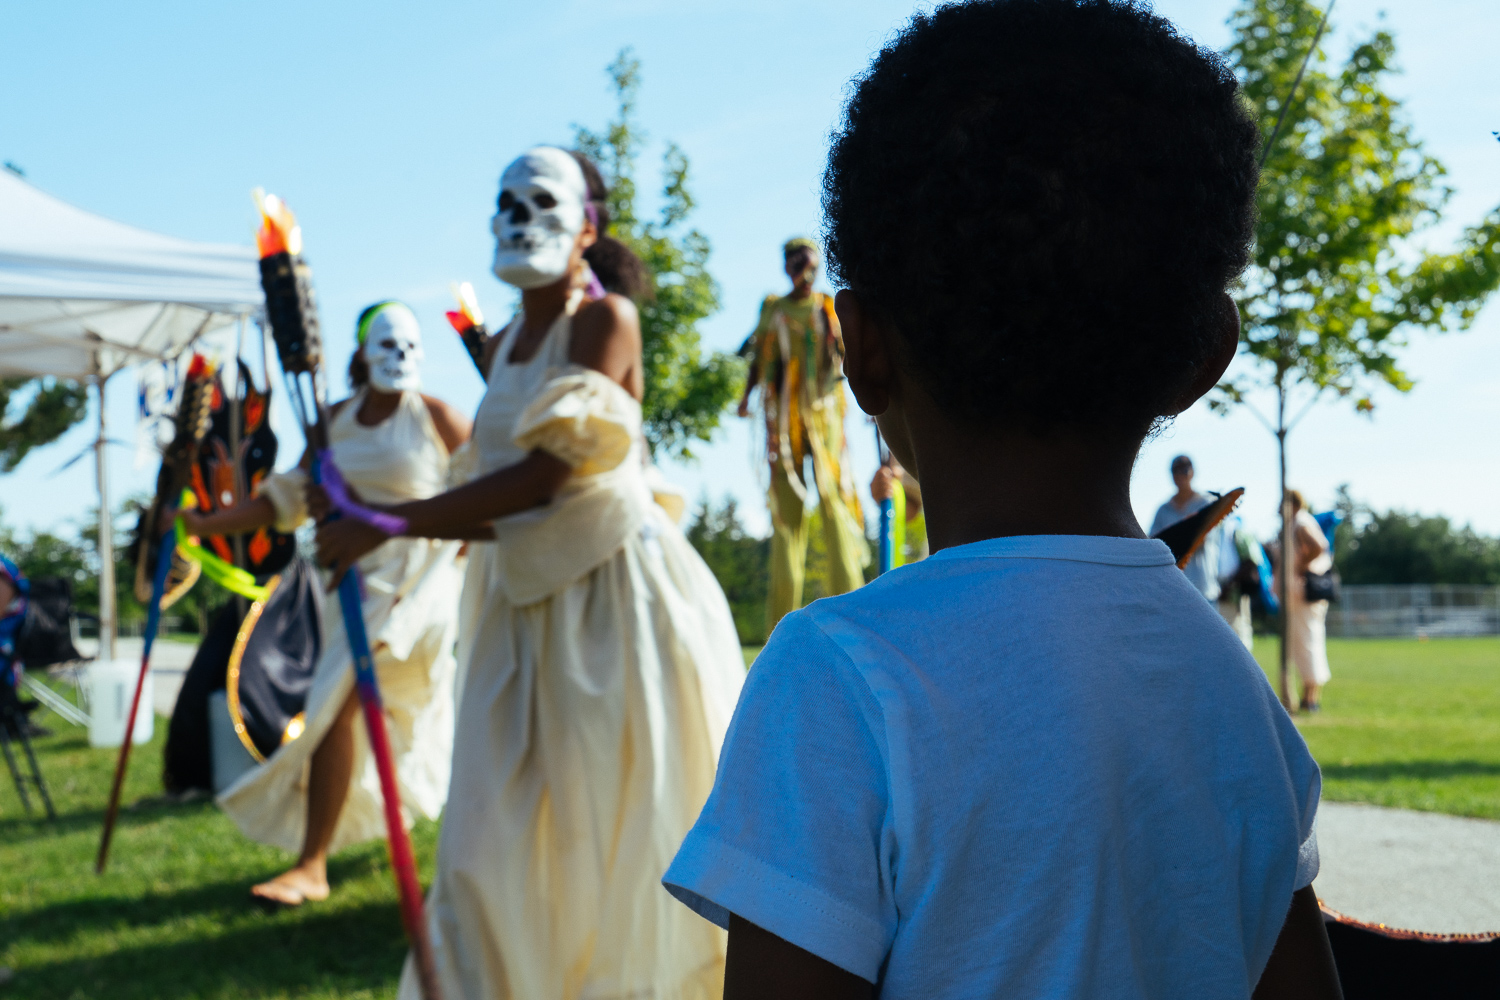 A child watches several performers in long white costumes and masks walk by.